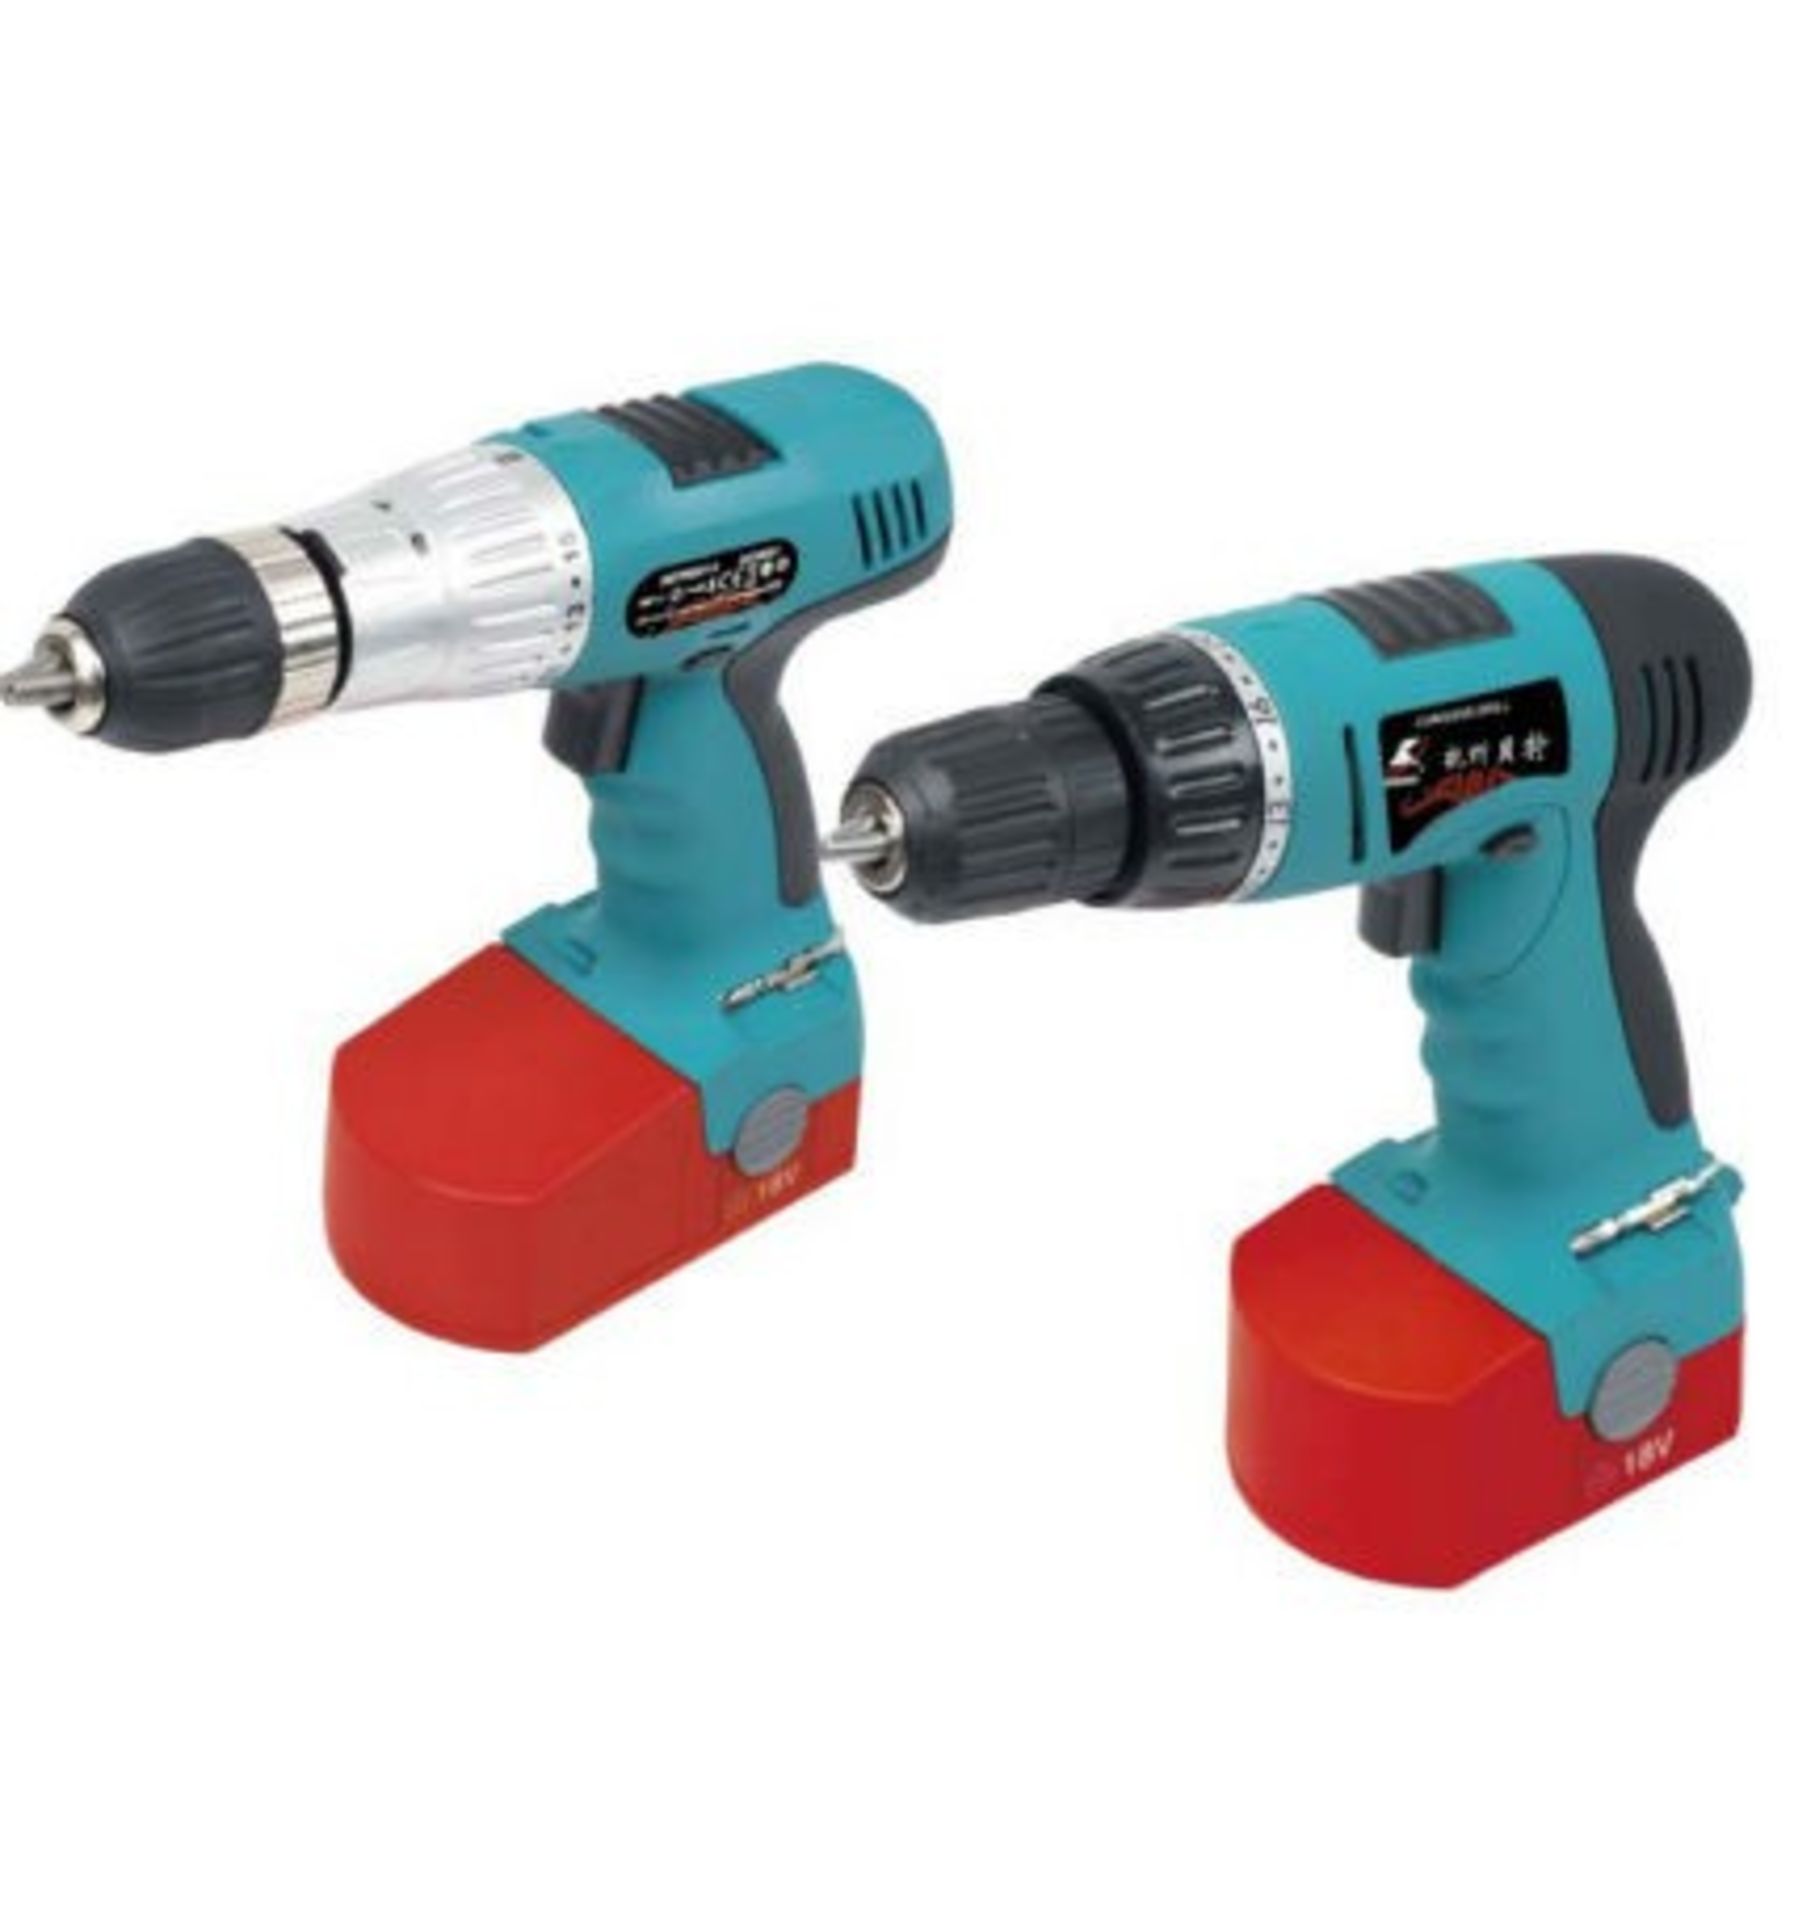 V *TRADE QTY* Brand New 18V Twin Drill Kit with Hammer Action and Torque Adjustment - with 15